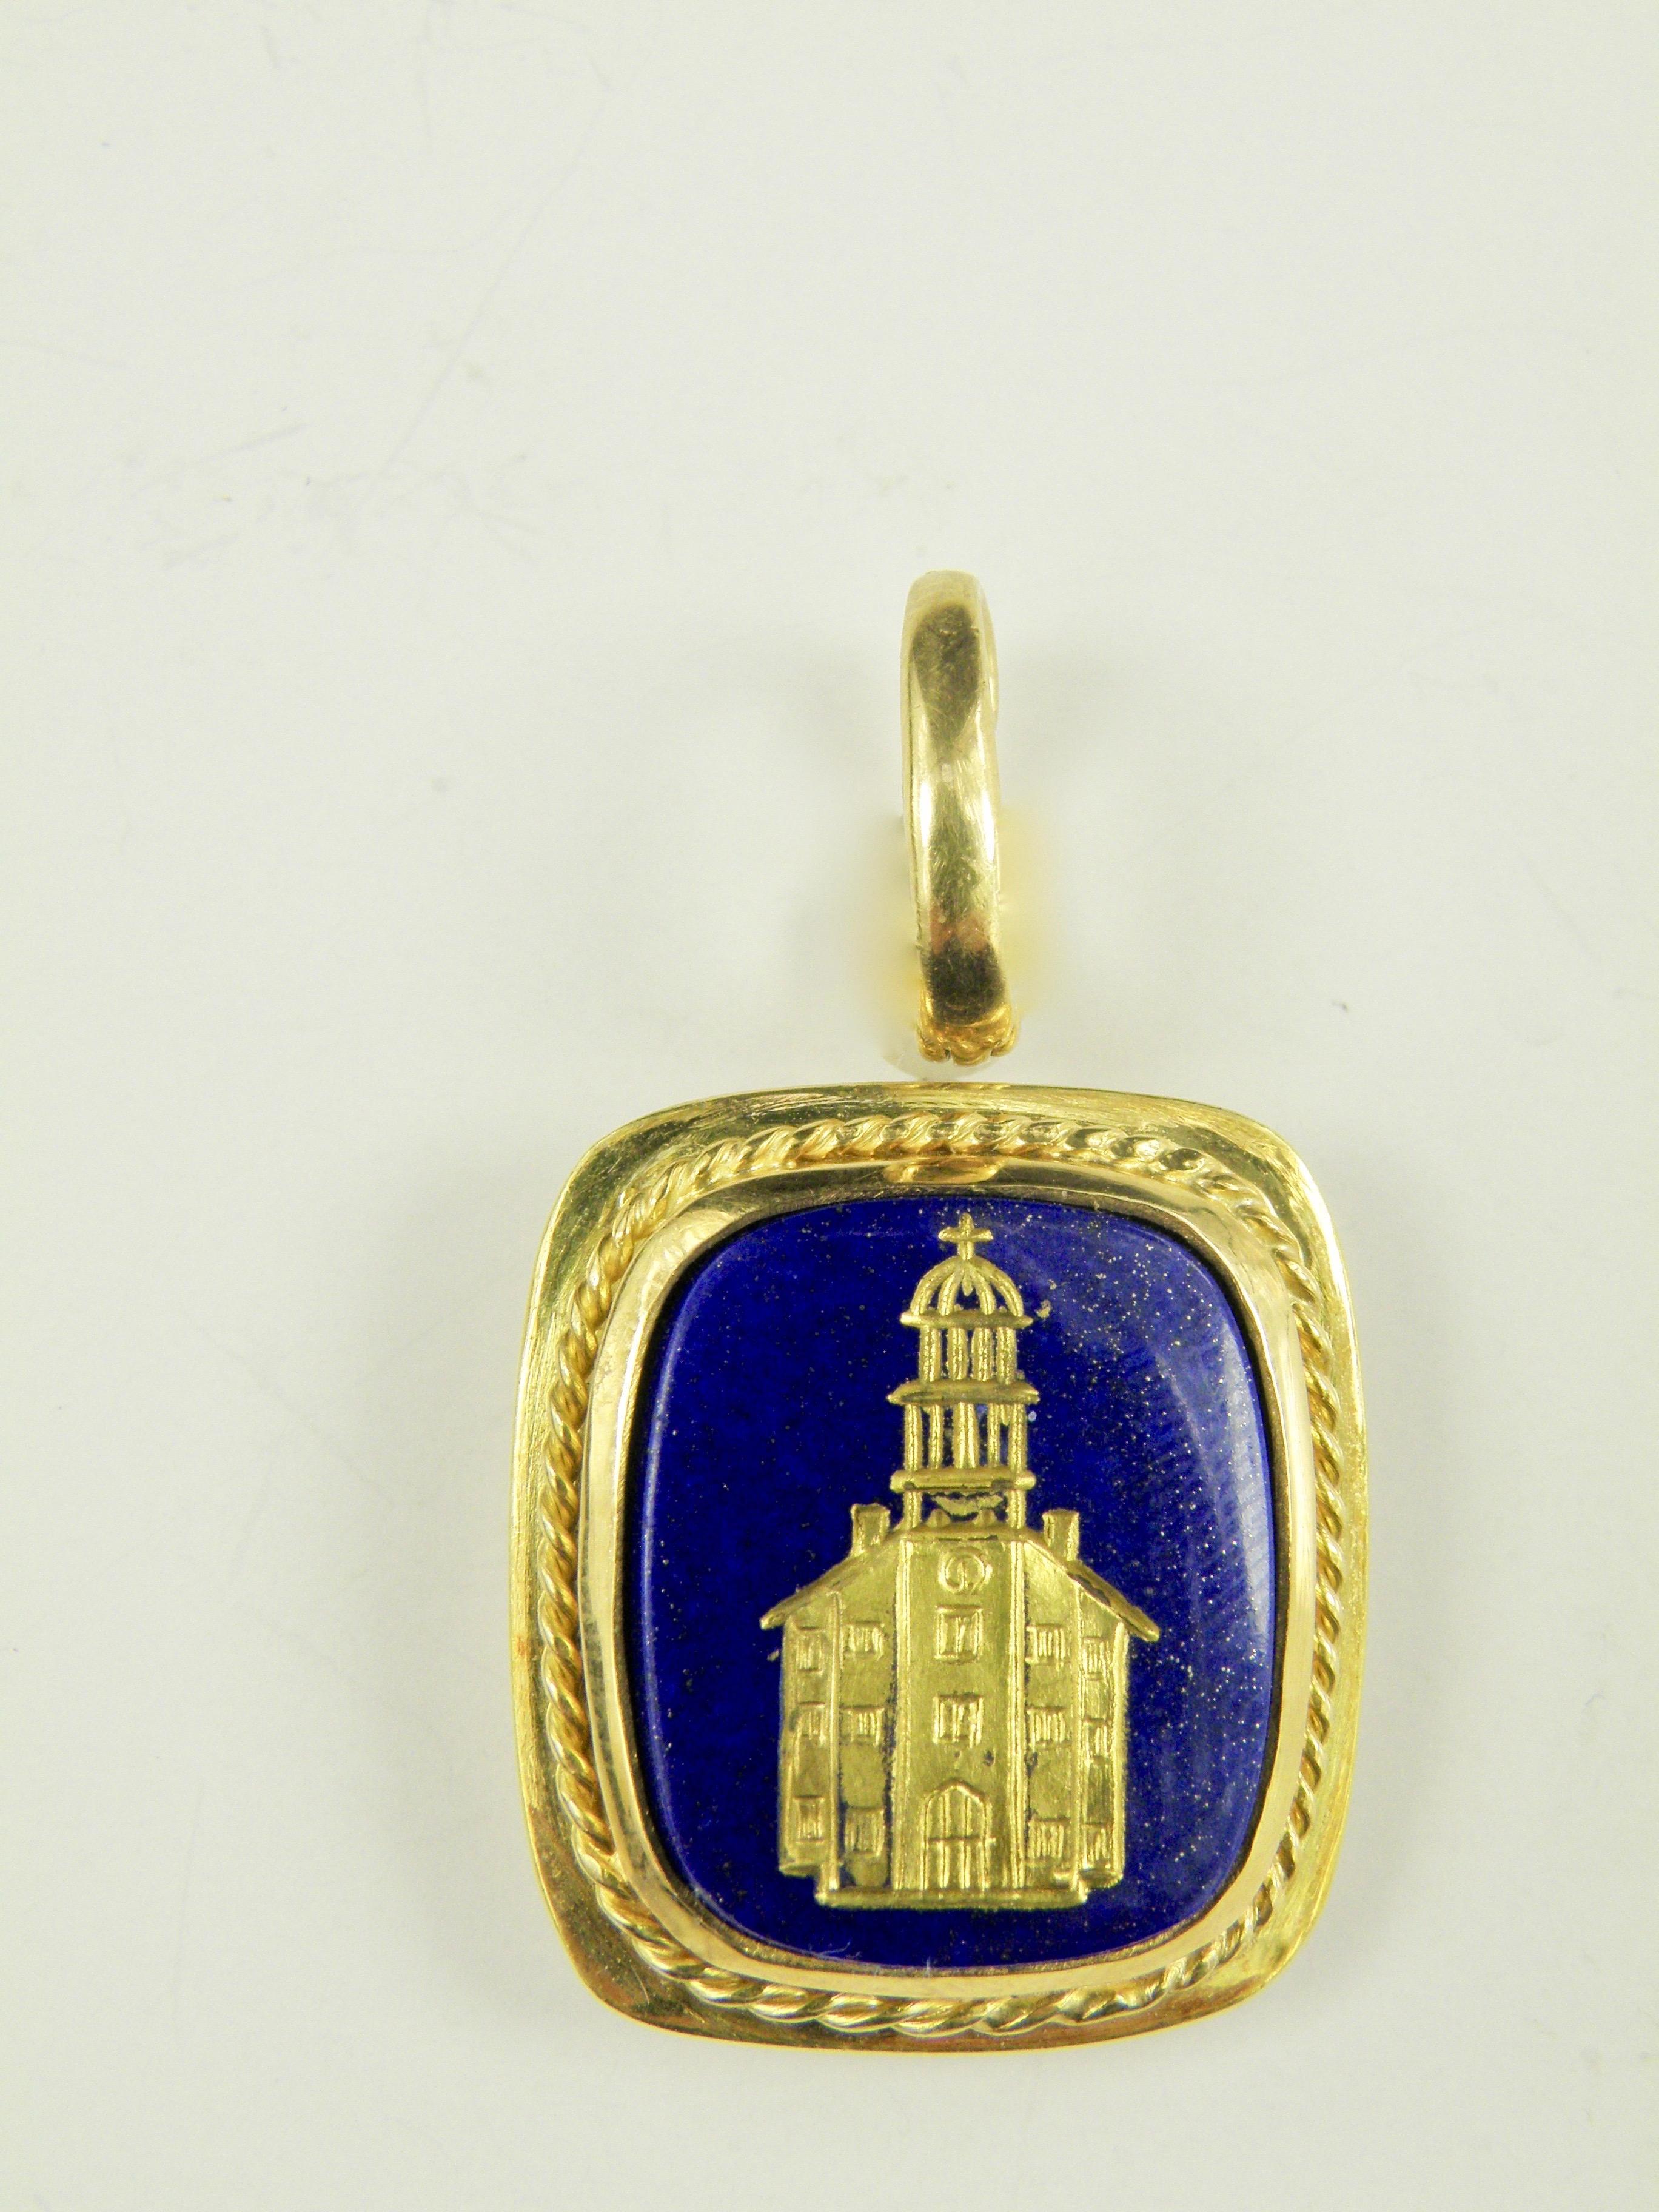 18 mm x 18 mm carved lapis lazuli building with inlaid gold.

